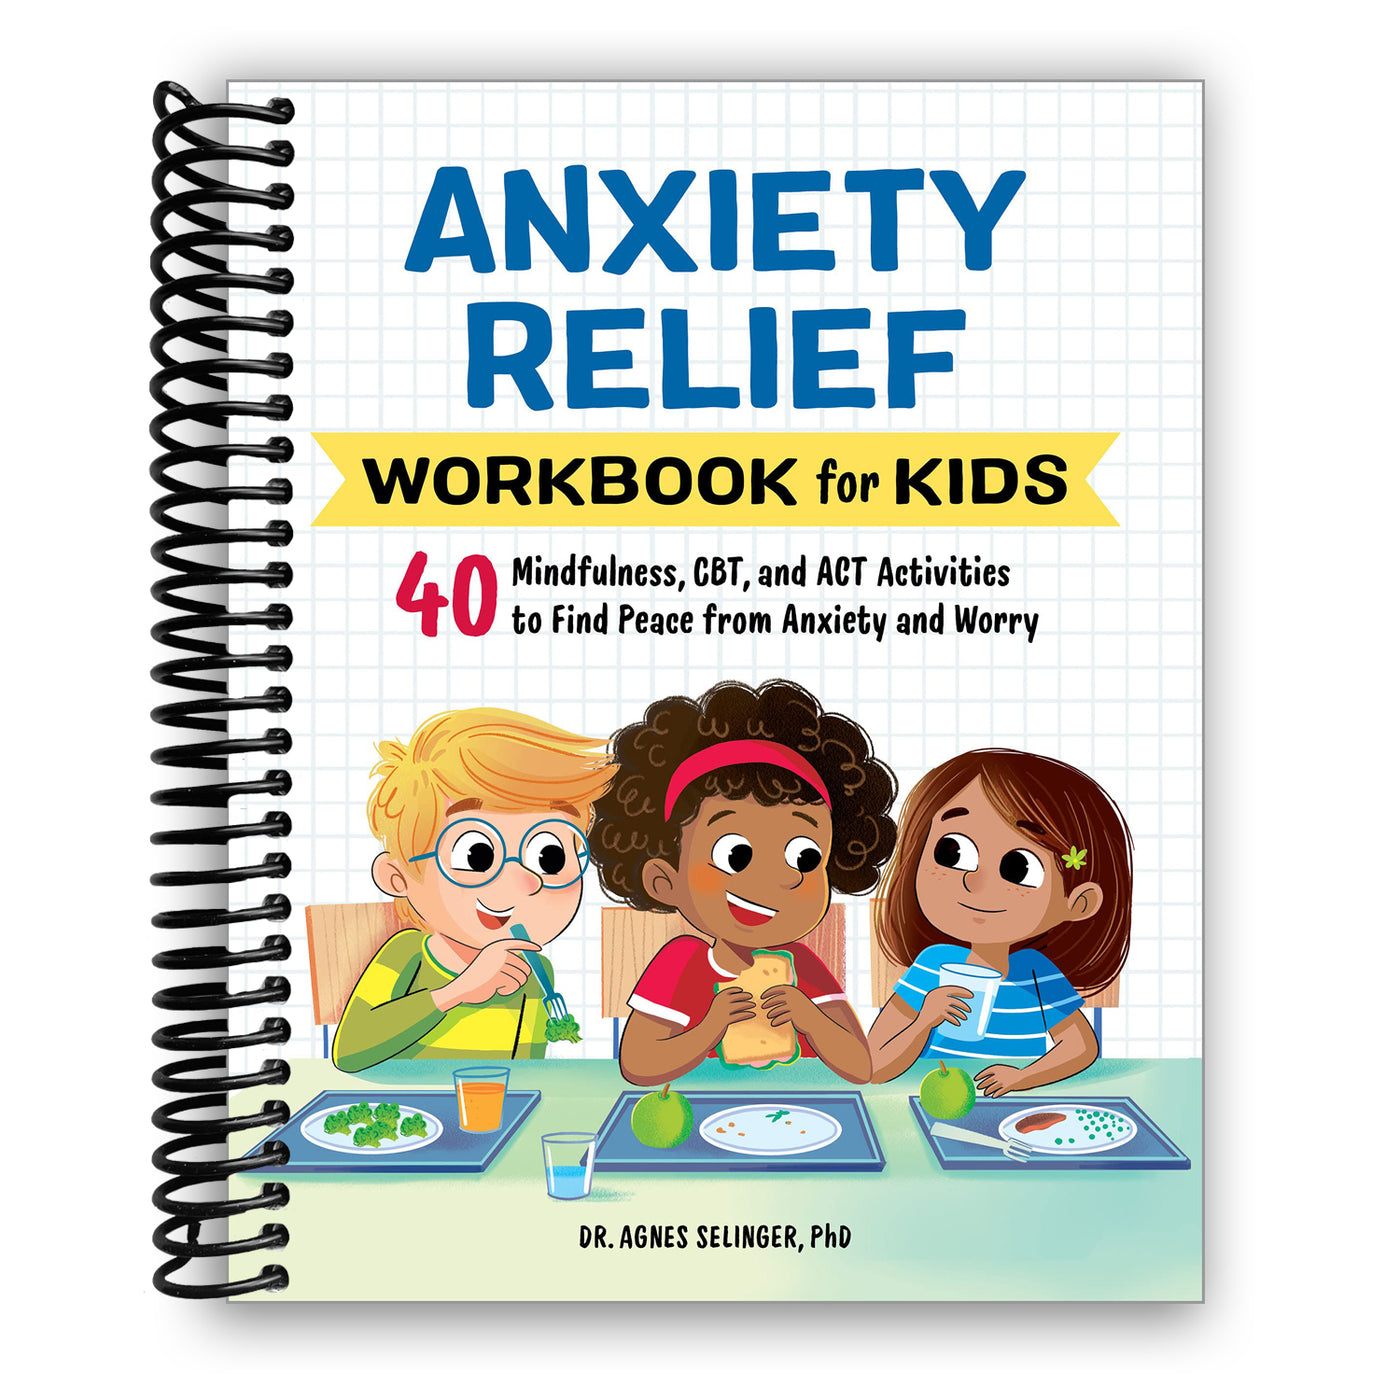 Anxiety Relief Workbook for Kids: 40 Mindfulness, CBT, and ACT Activities to Find Peace from Anxiety and Worry (Spiral Bound)